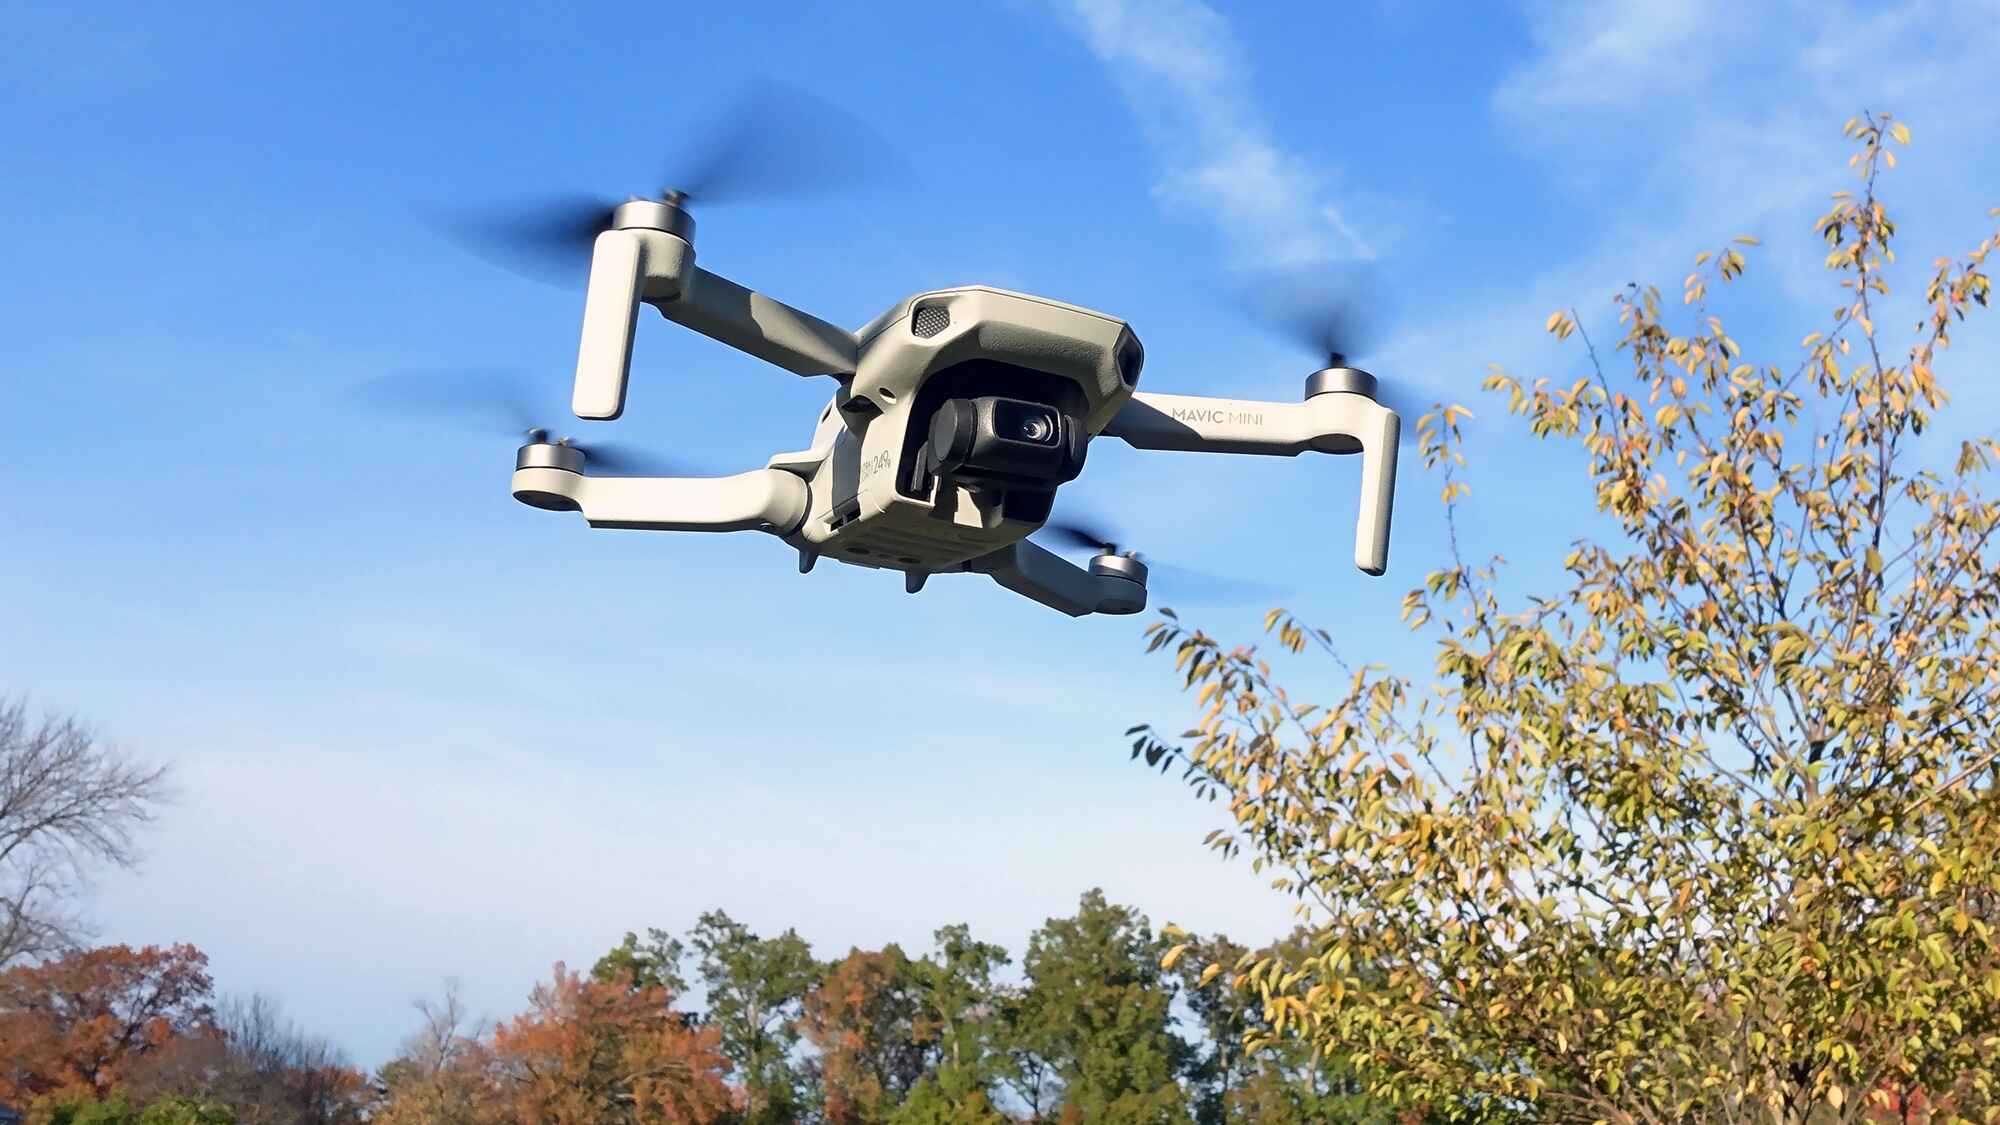 What Does DJI Stand For?